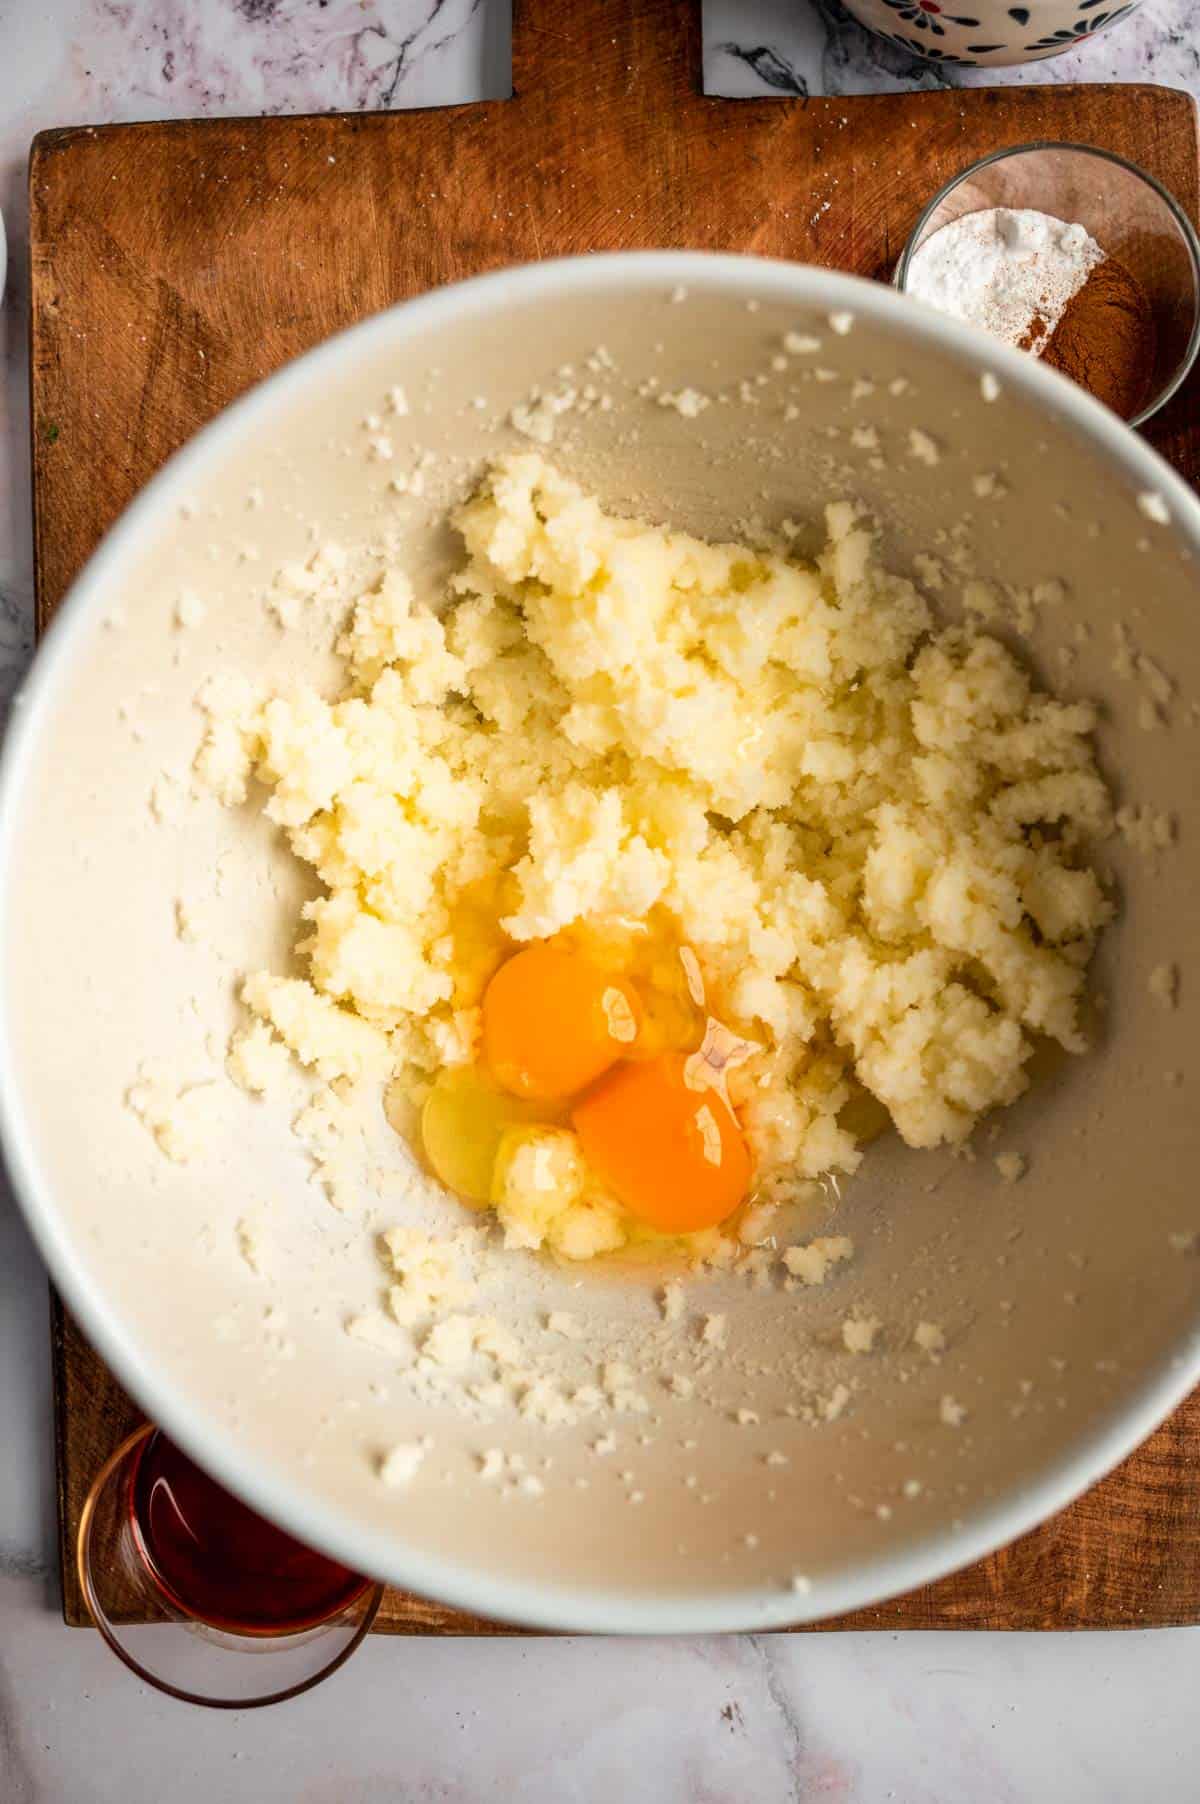 The mixed butter and sugar with 2 eggs sitting in the bowl.